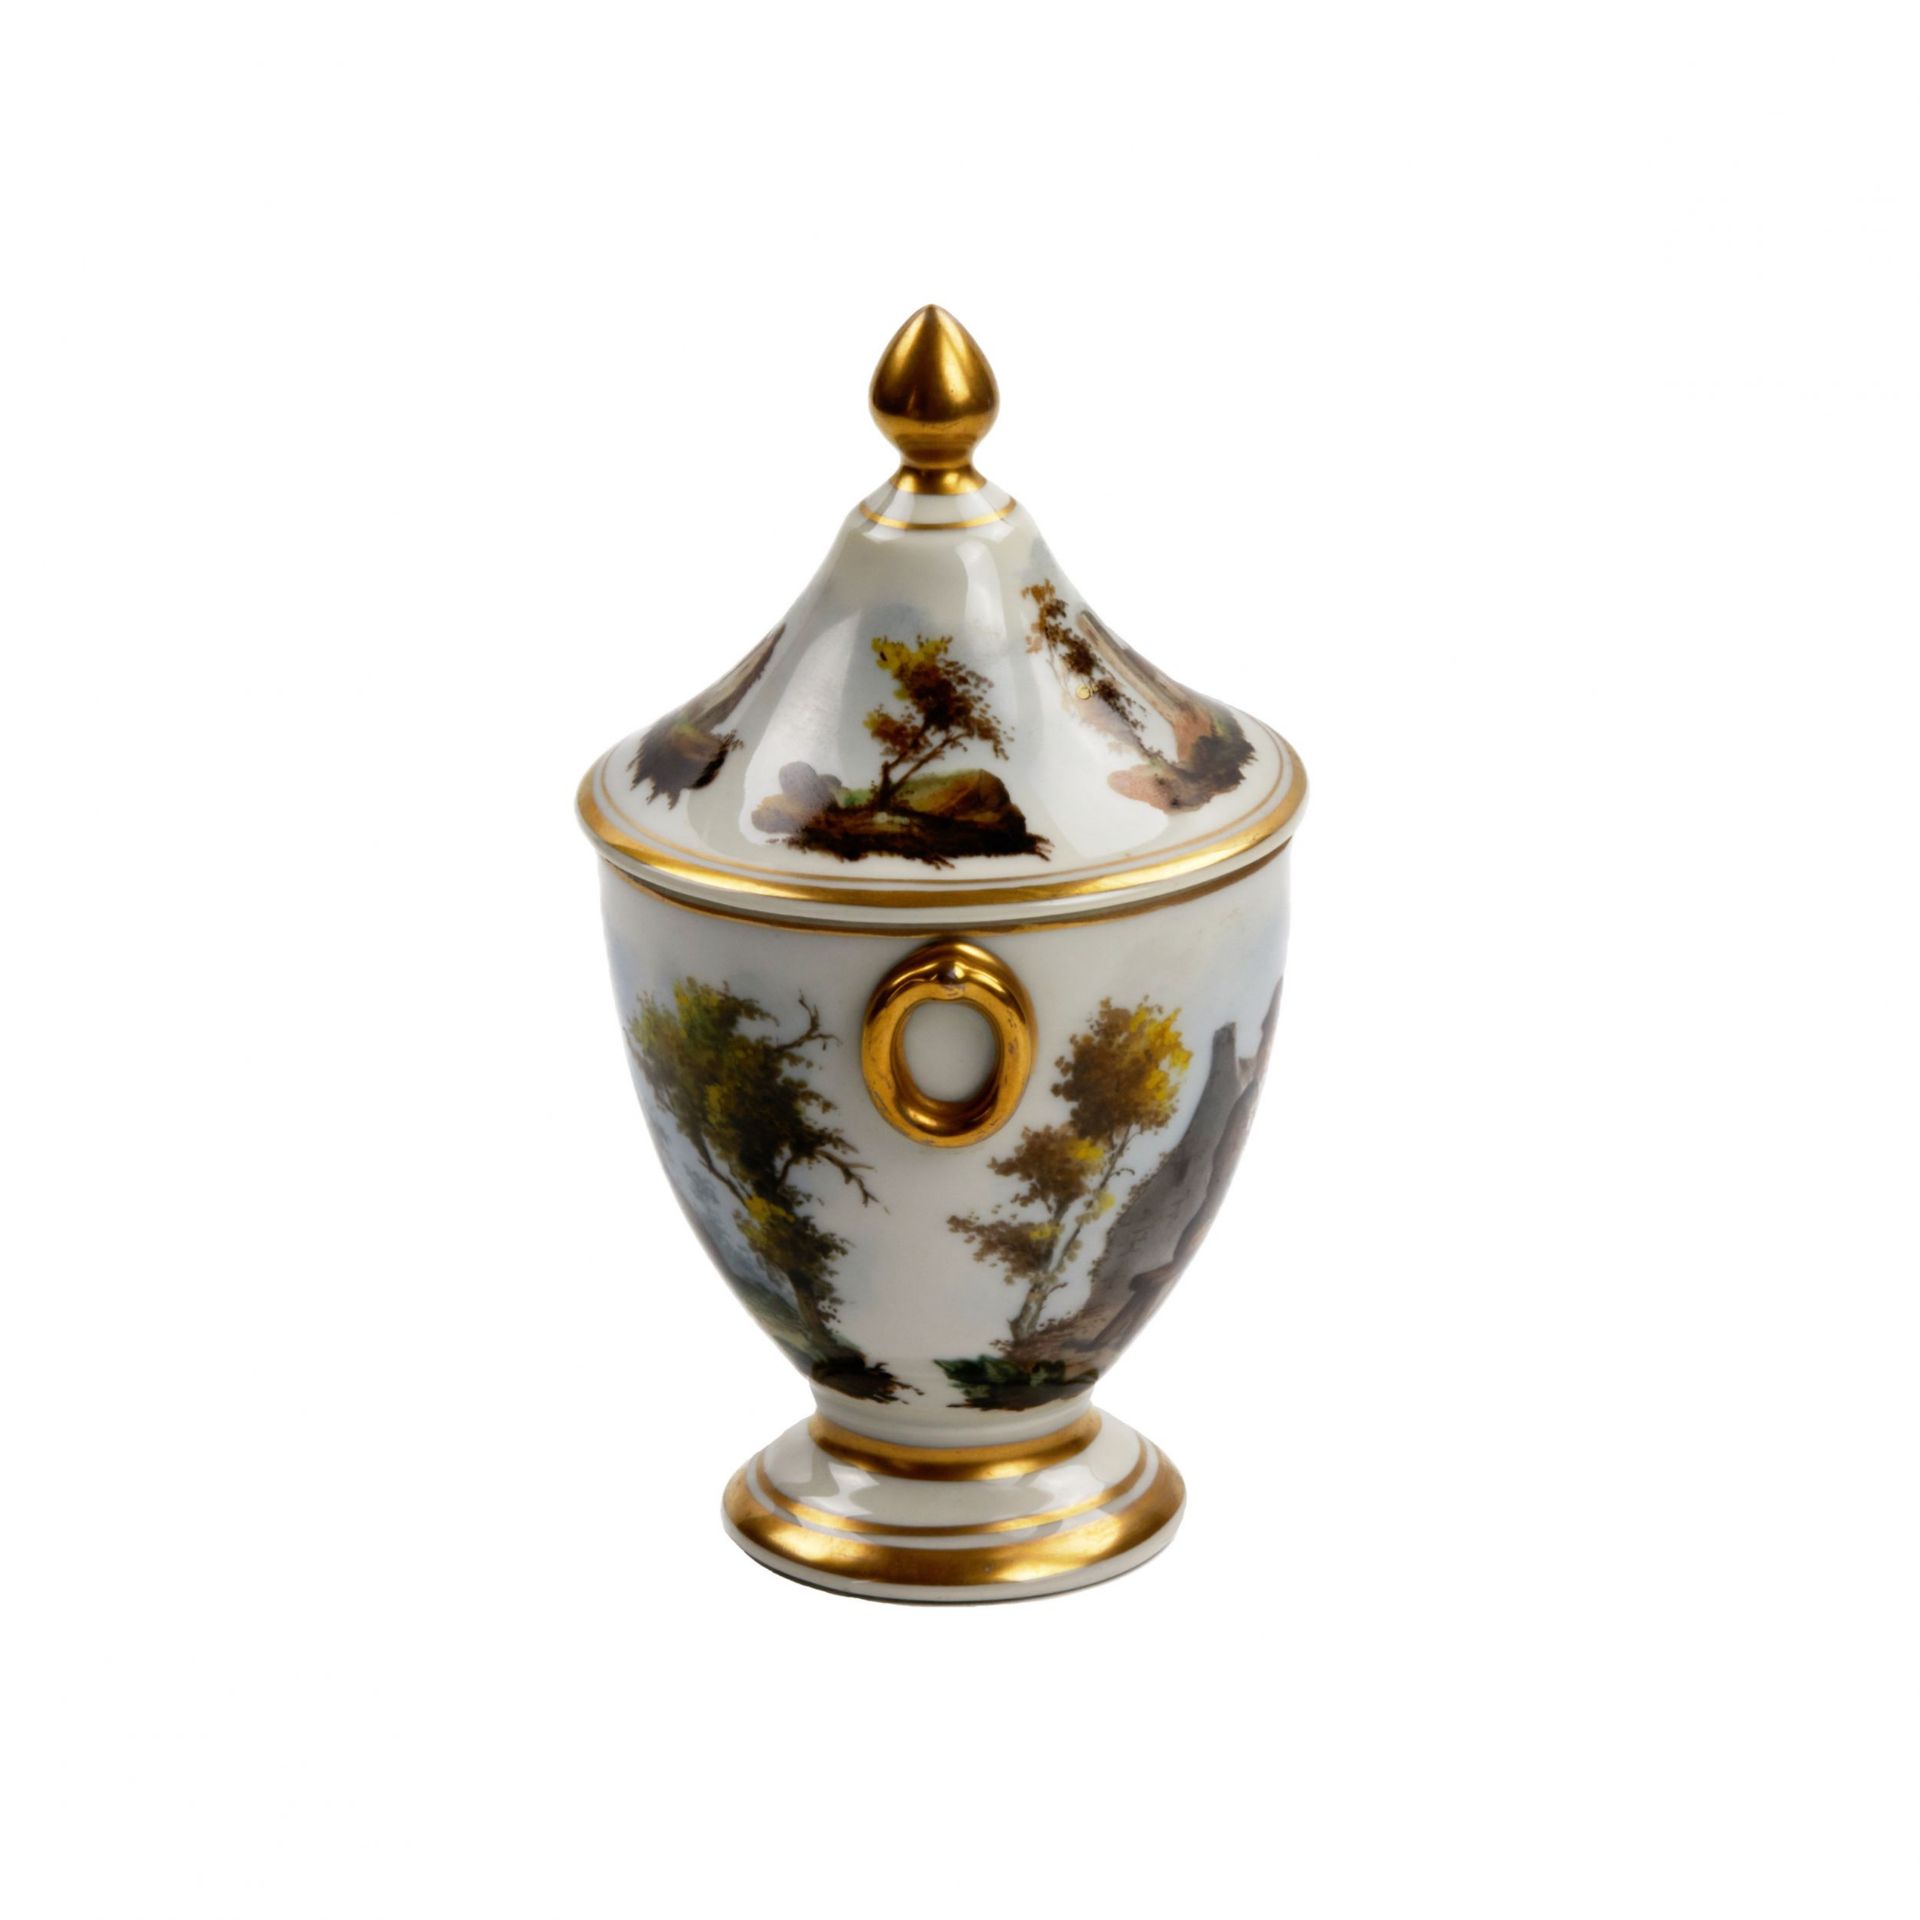 French tete-a-tete porcelain service, 19th century. - Image 10 of 19